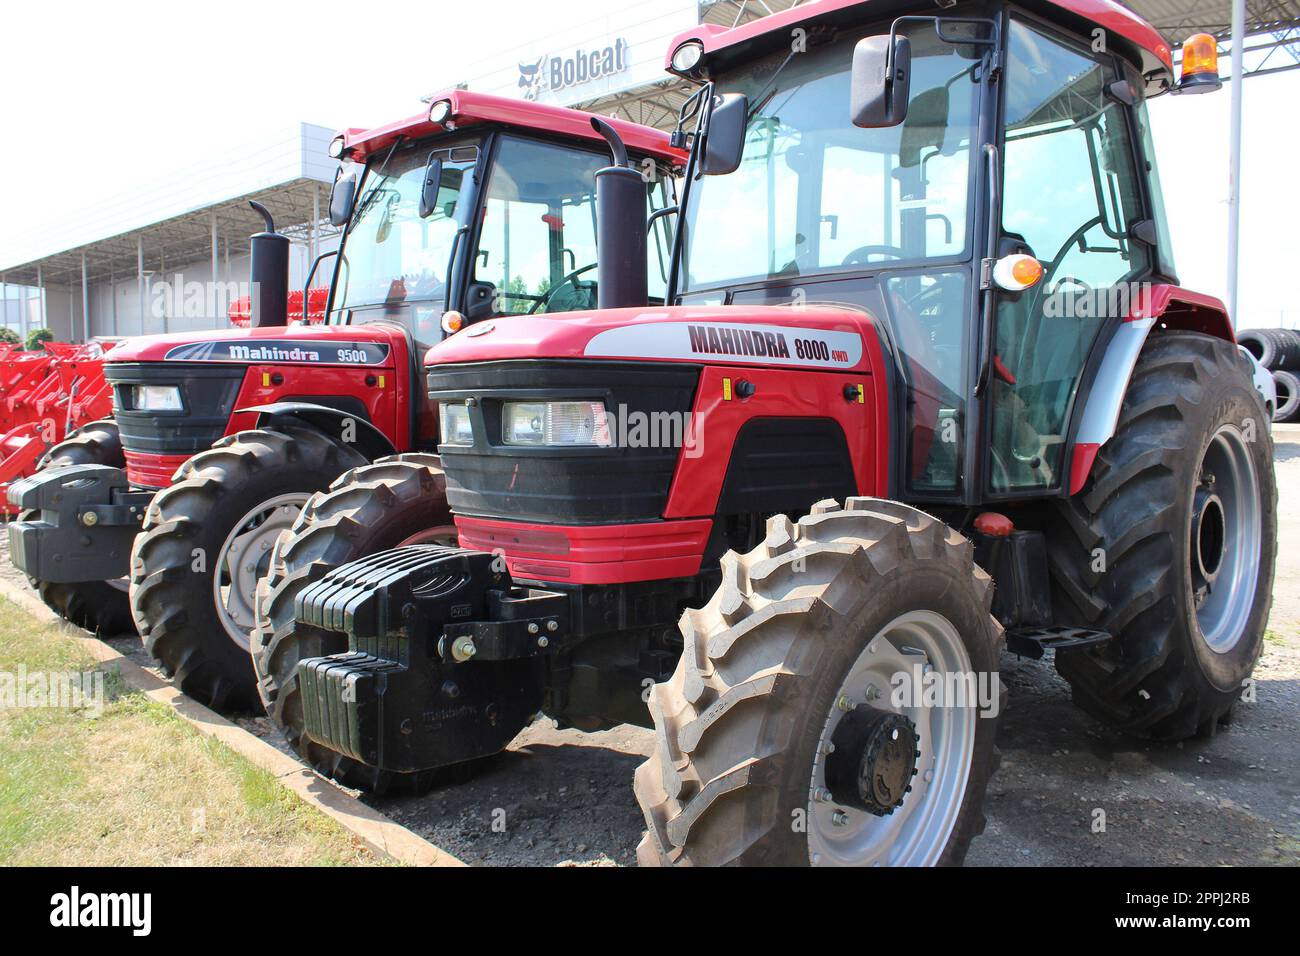 Kyiv, Ukraine - June 16, 2020: Mahindra agricultural heavy machinery equipment parked on the street Stock Photo